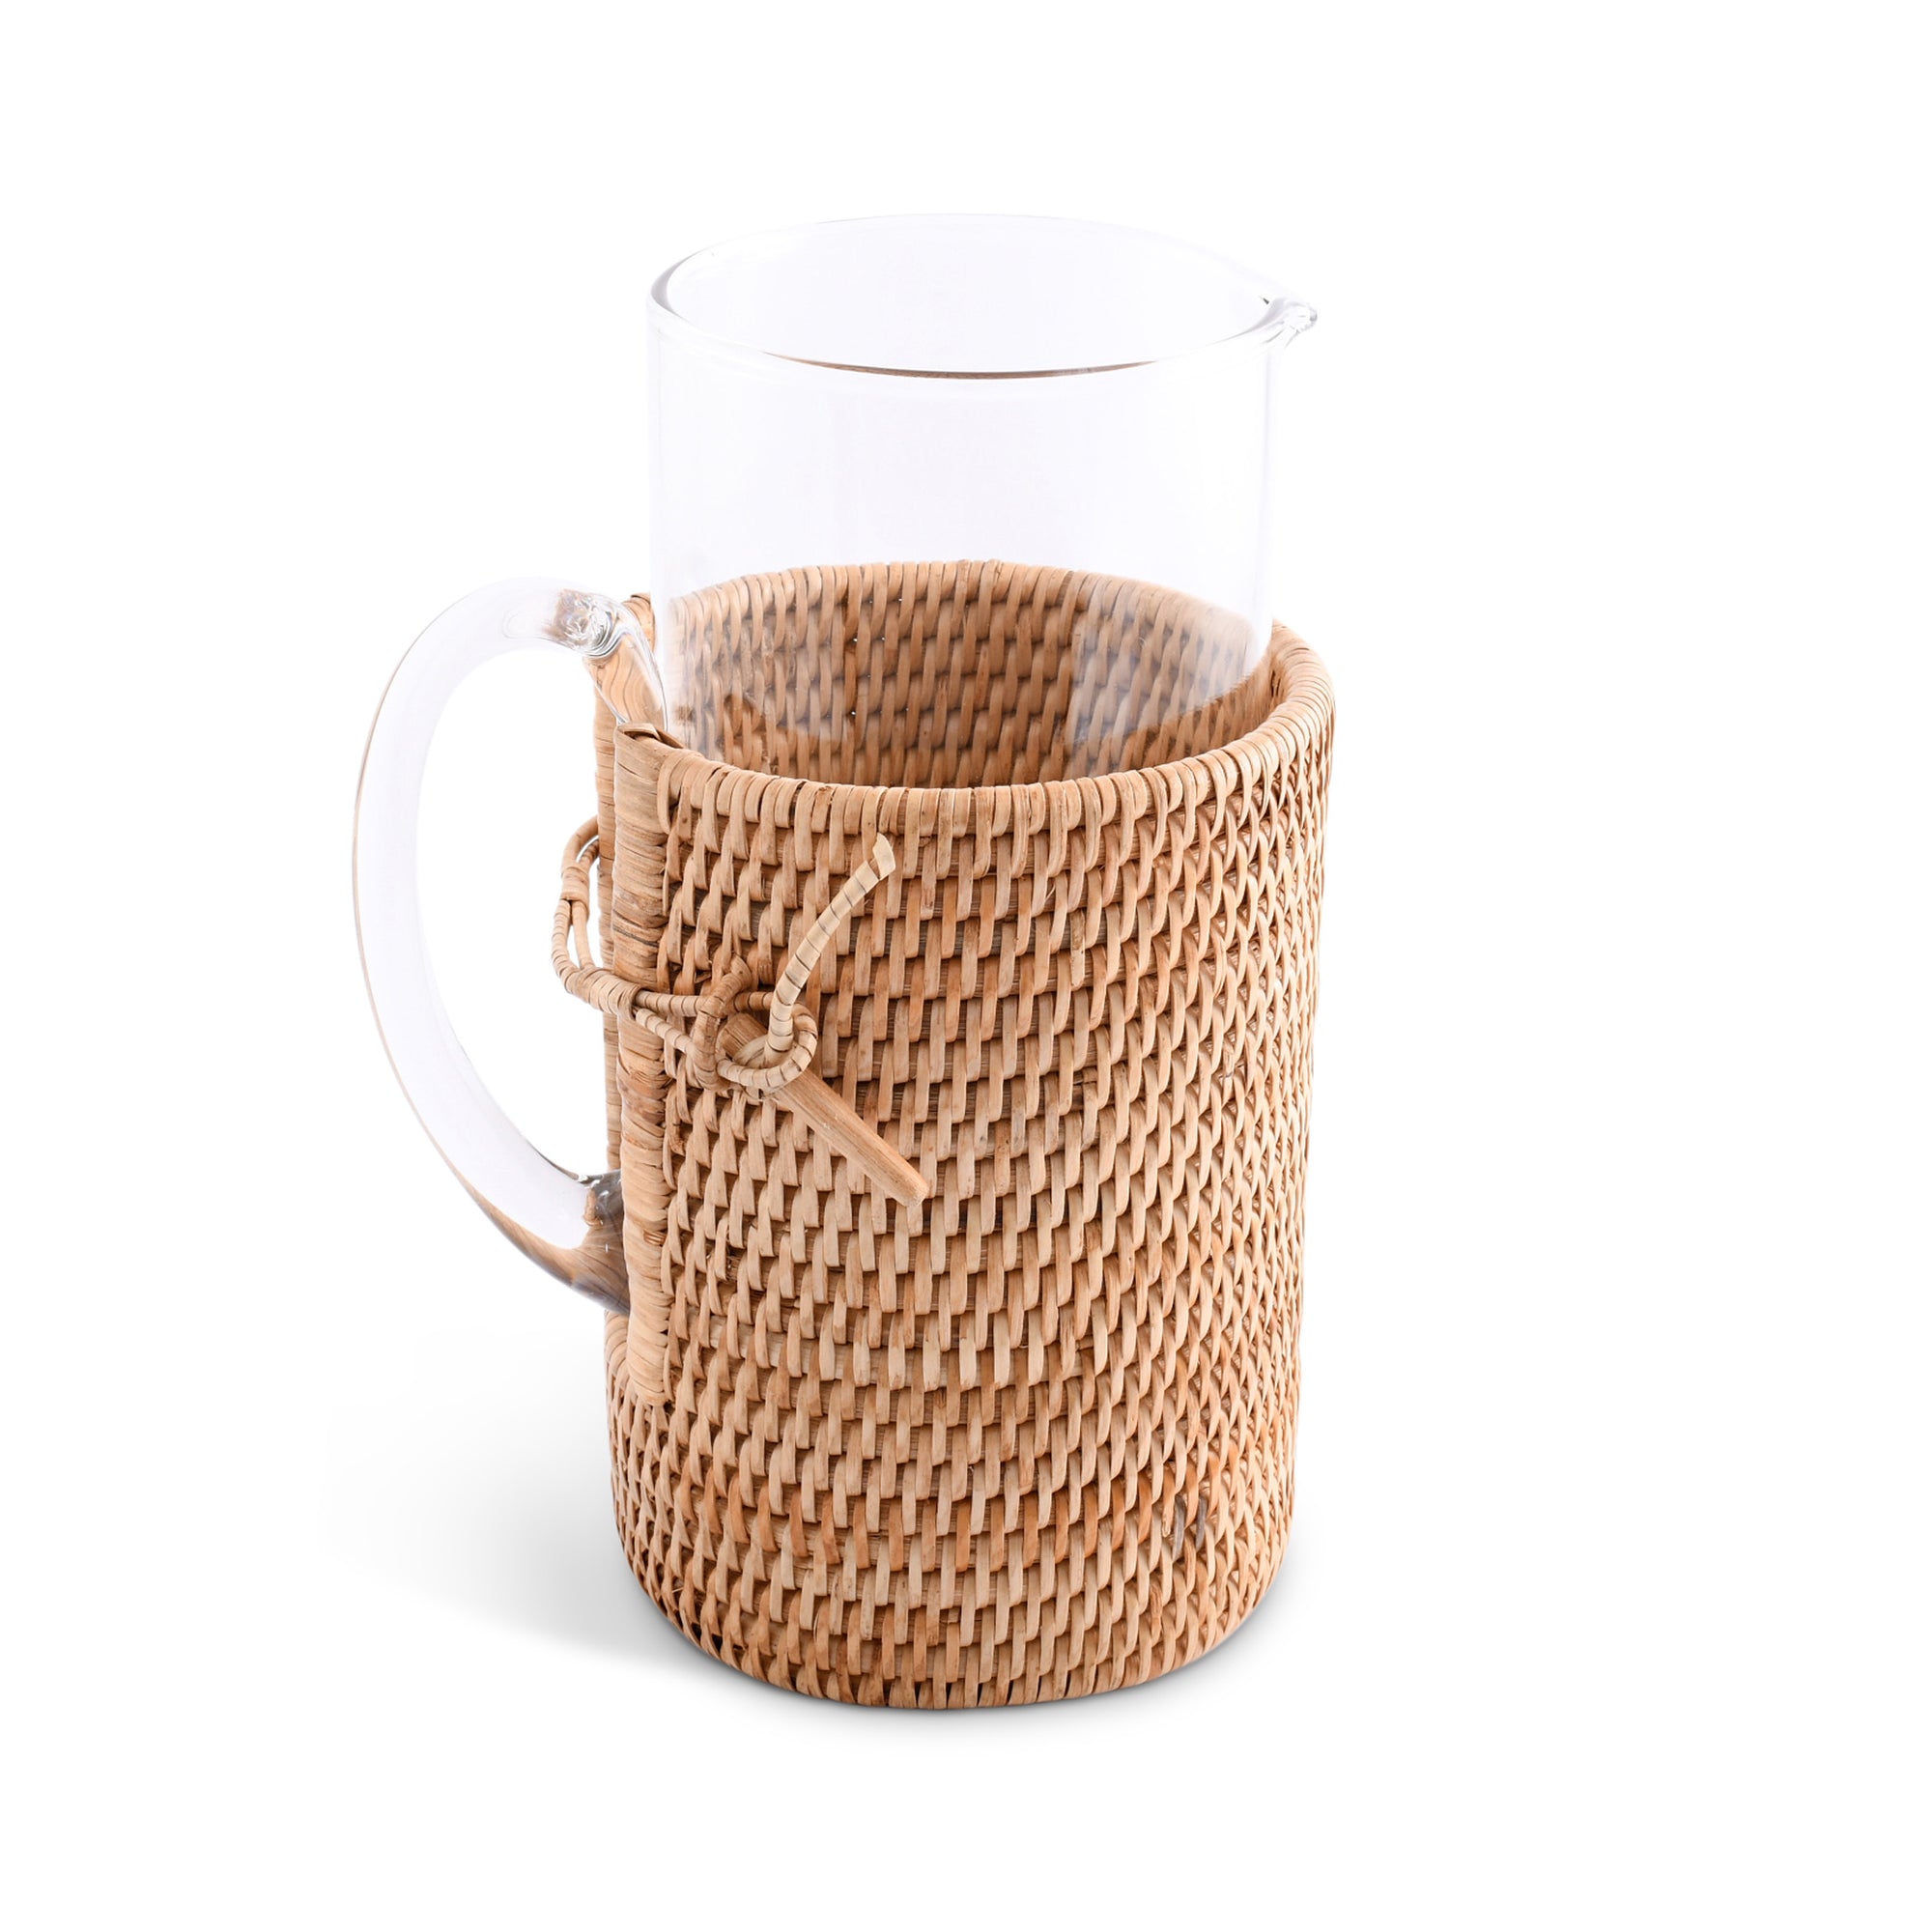 Vagabond House Glass Pitcher Hand Woven Wicker Natural Rattan Cover Product Image